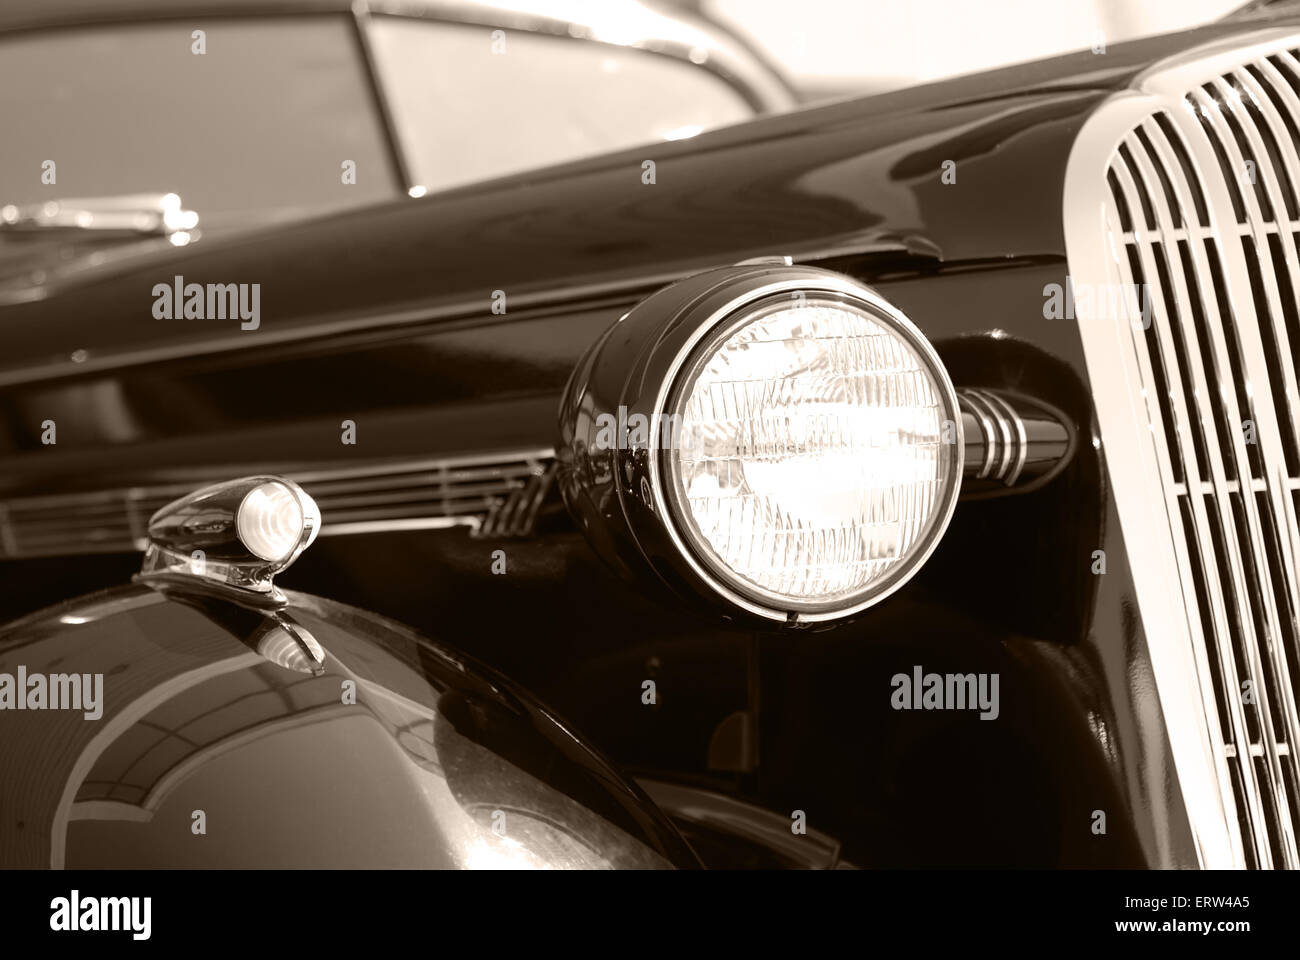 The front of black vintage car cabriolet Stock Photo